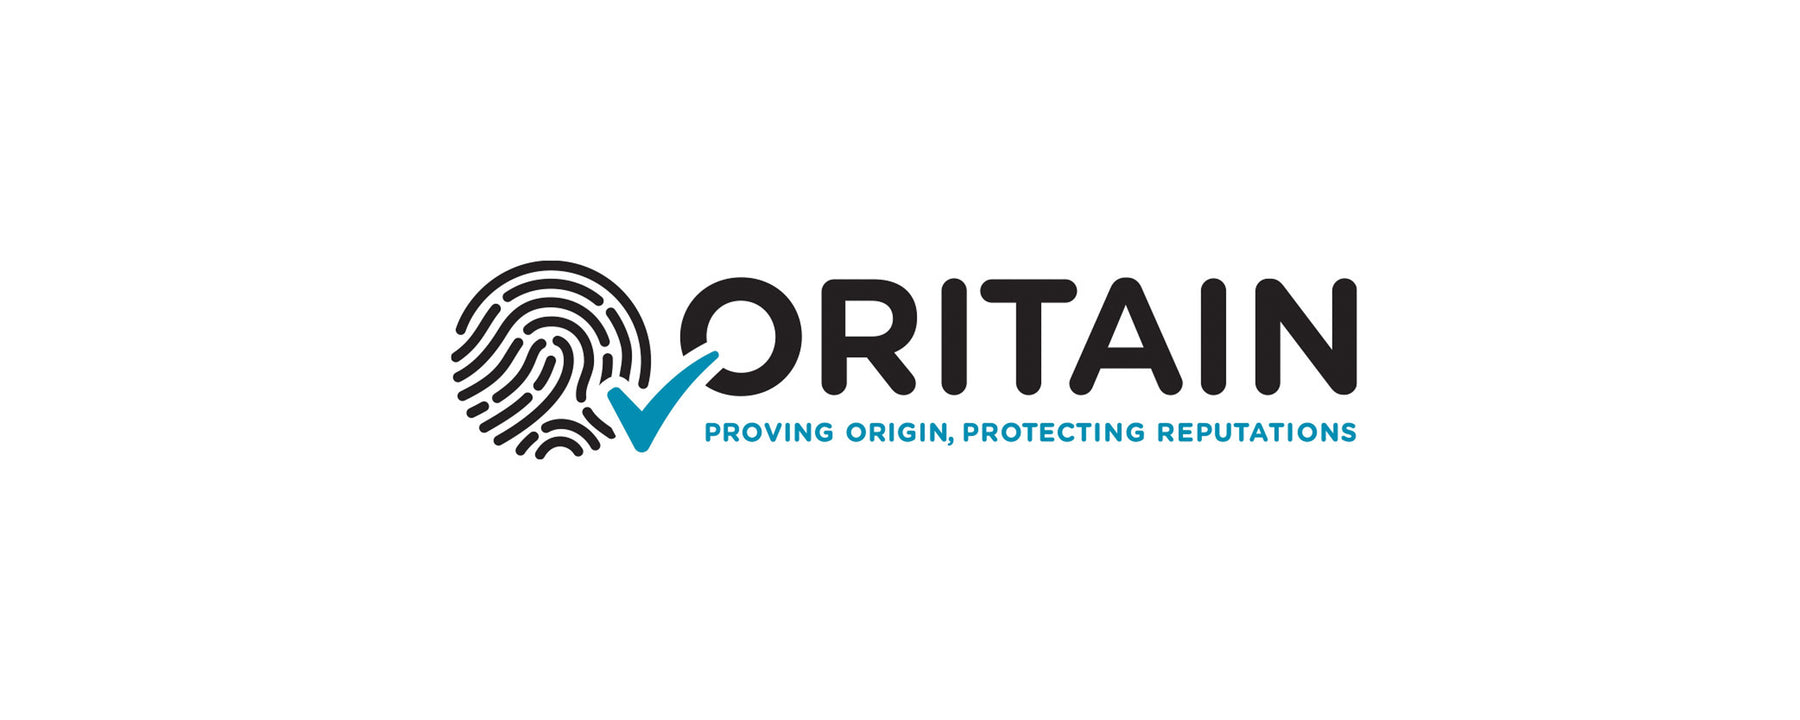 Continuing Educations Series: Traceability with Ben Tomkins from Oritain